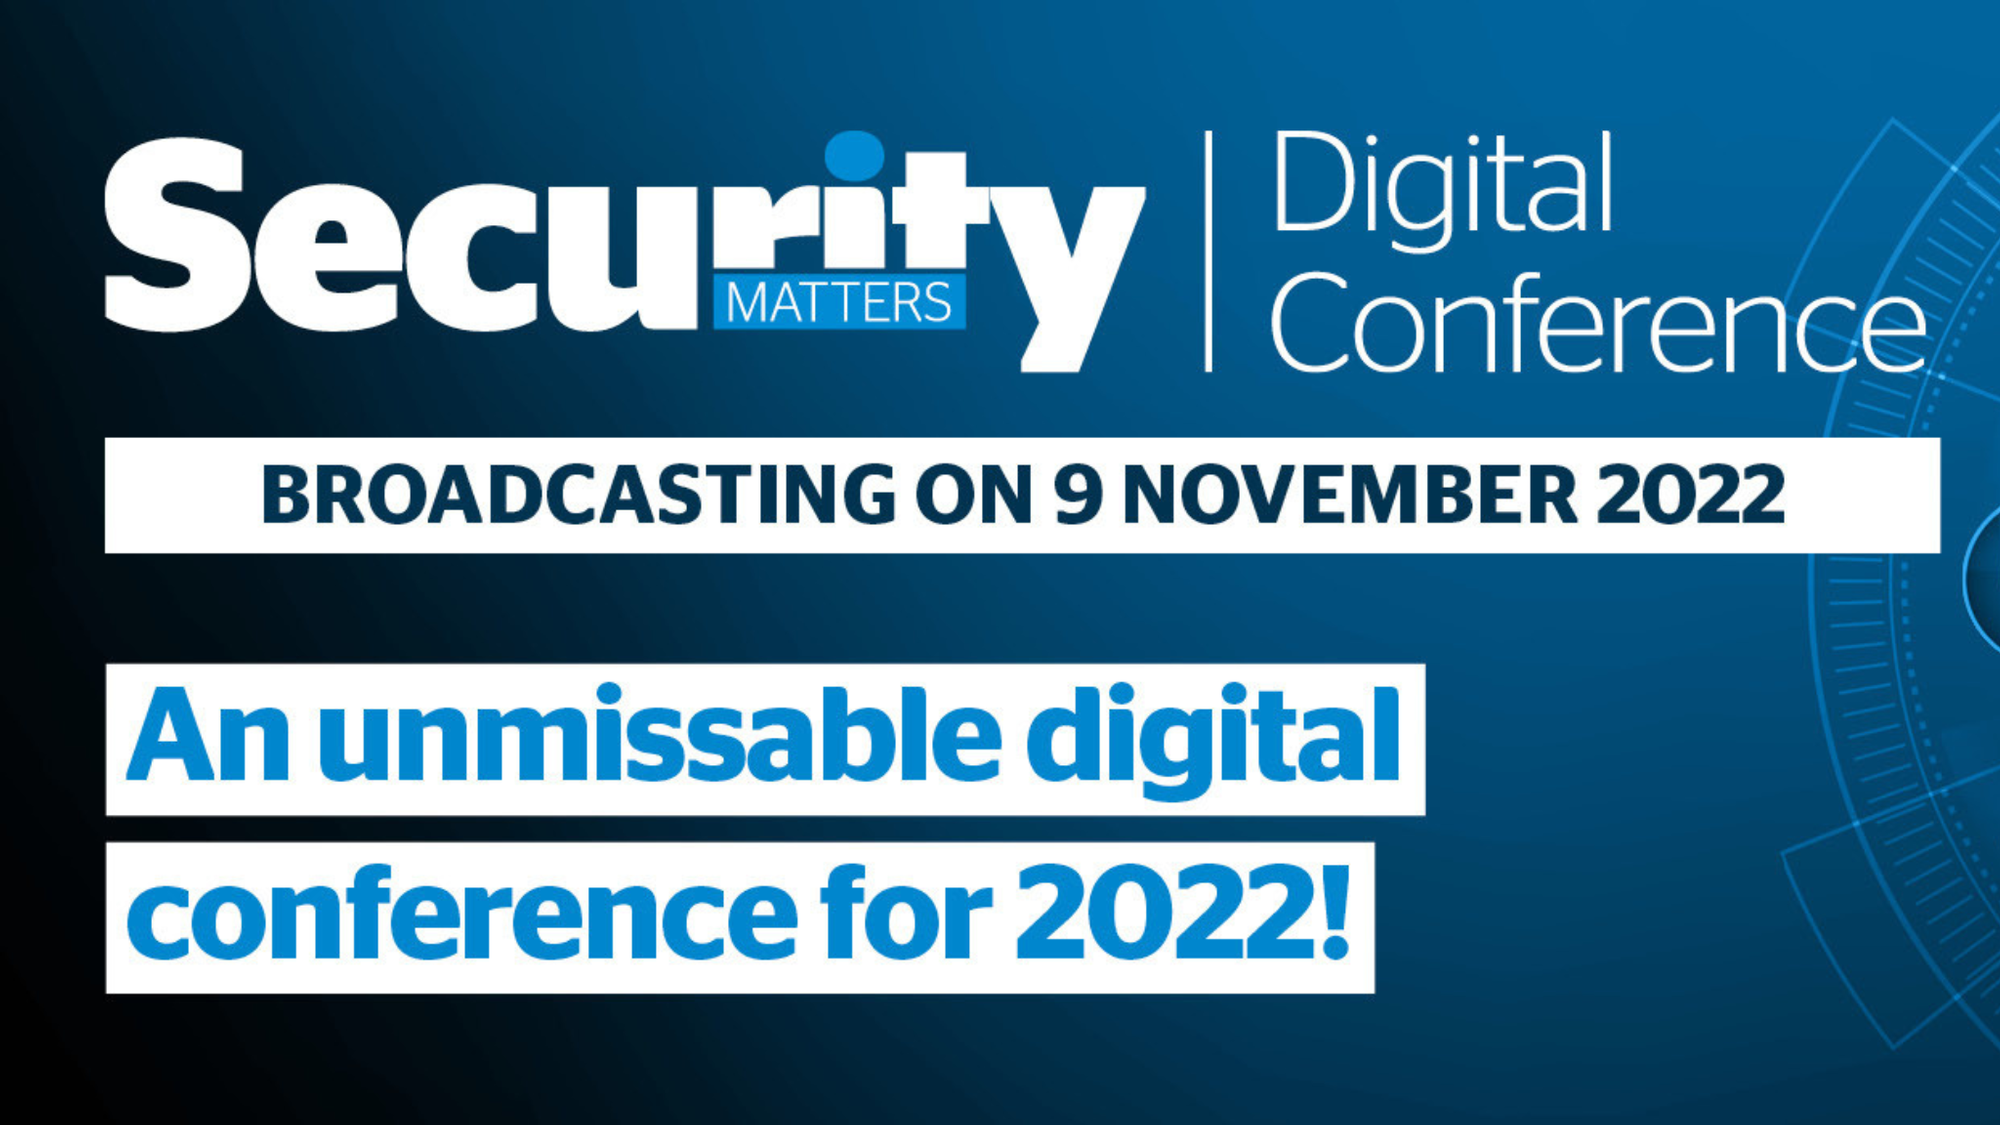 Skills for Security presenting at Security Matters Digital Conference 2022